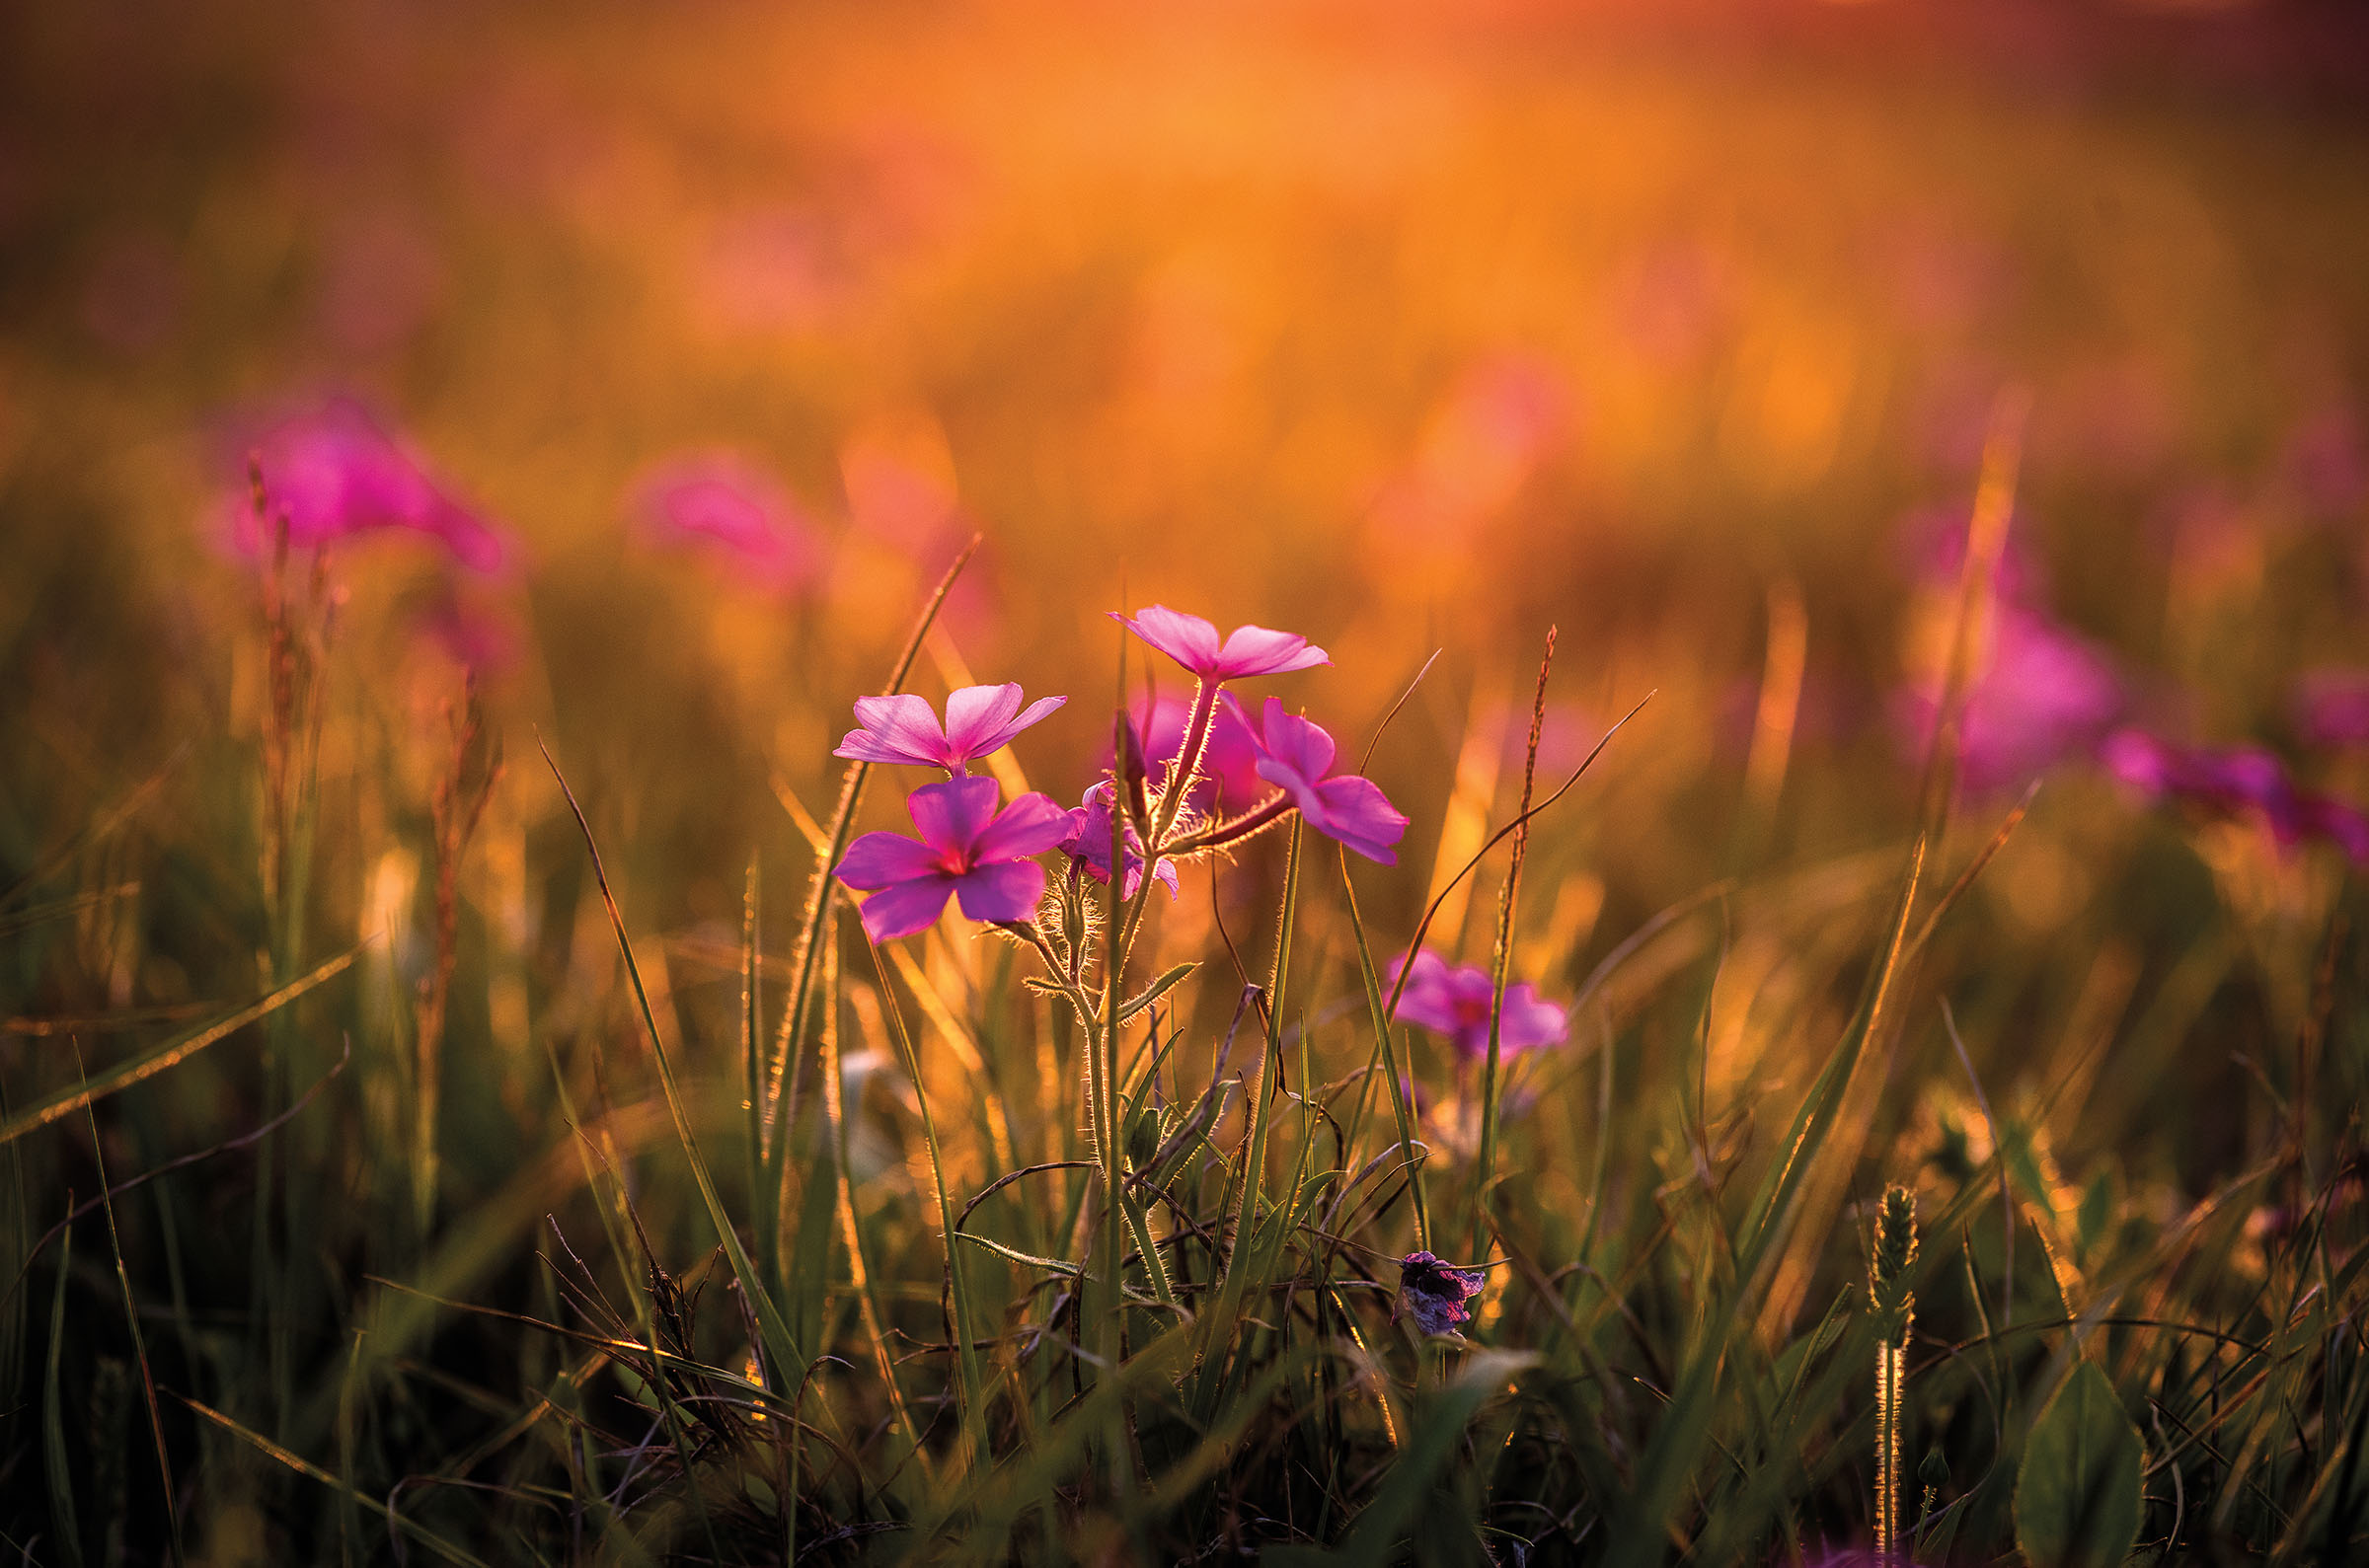 Bright purple flowers with green leaves on a golden sun background